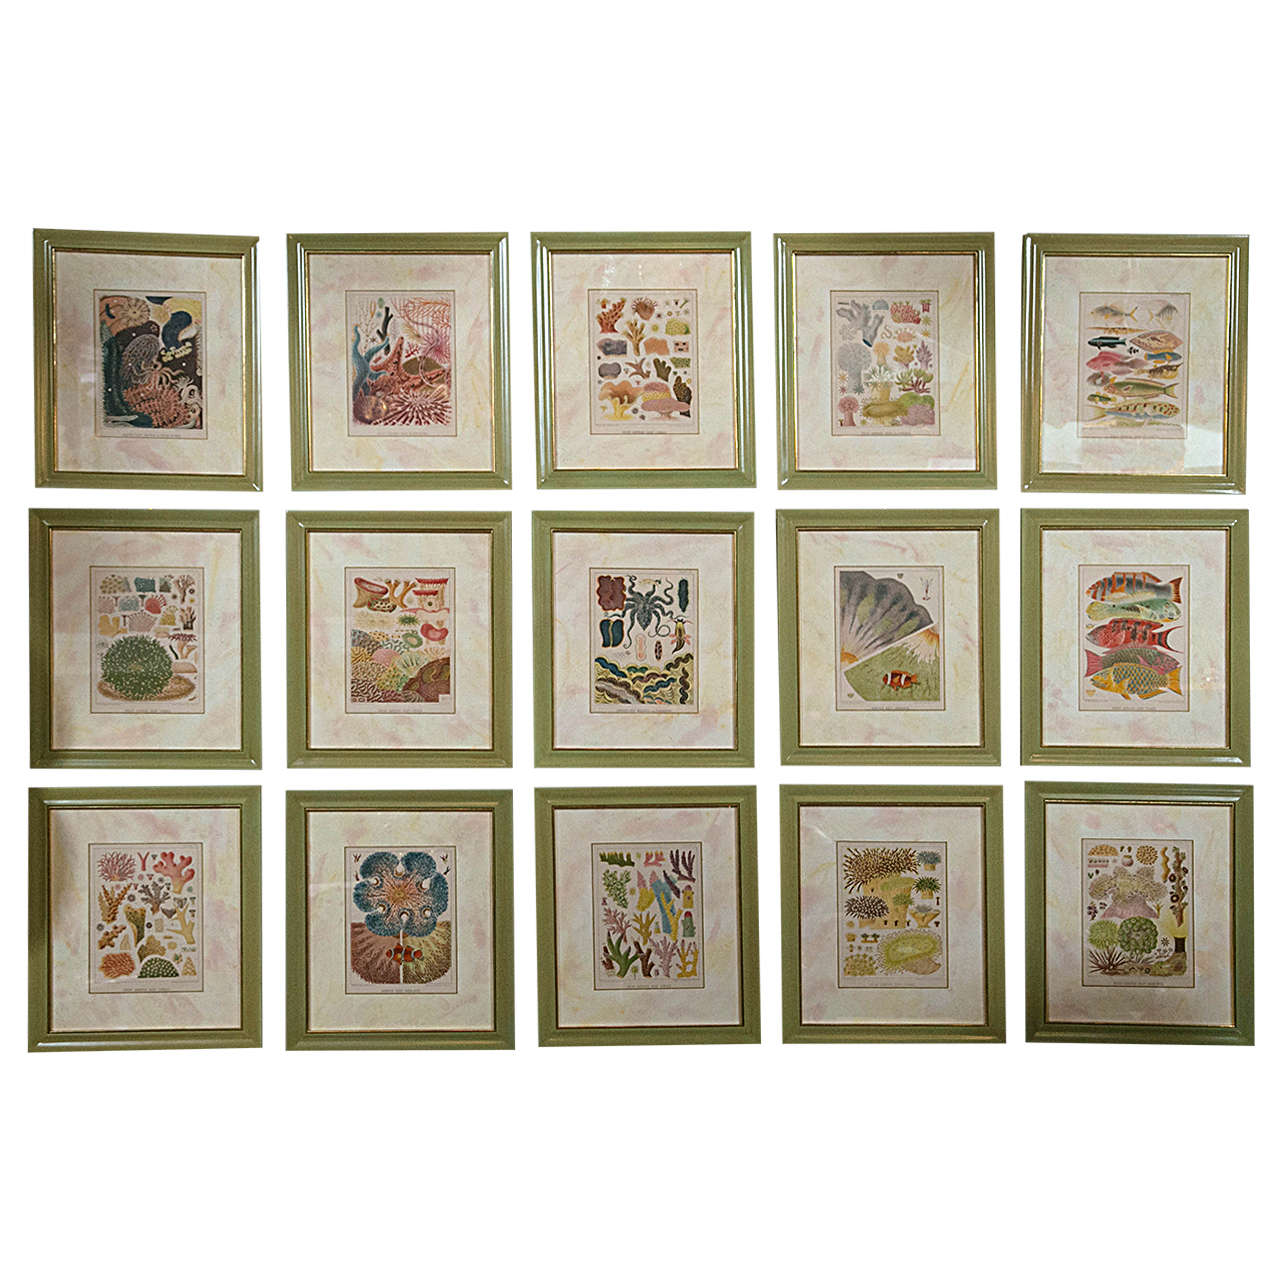 A set of 15 chromolithographs of the Great Barrier Reef by W. Saville-Kent framed in archival materials.